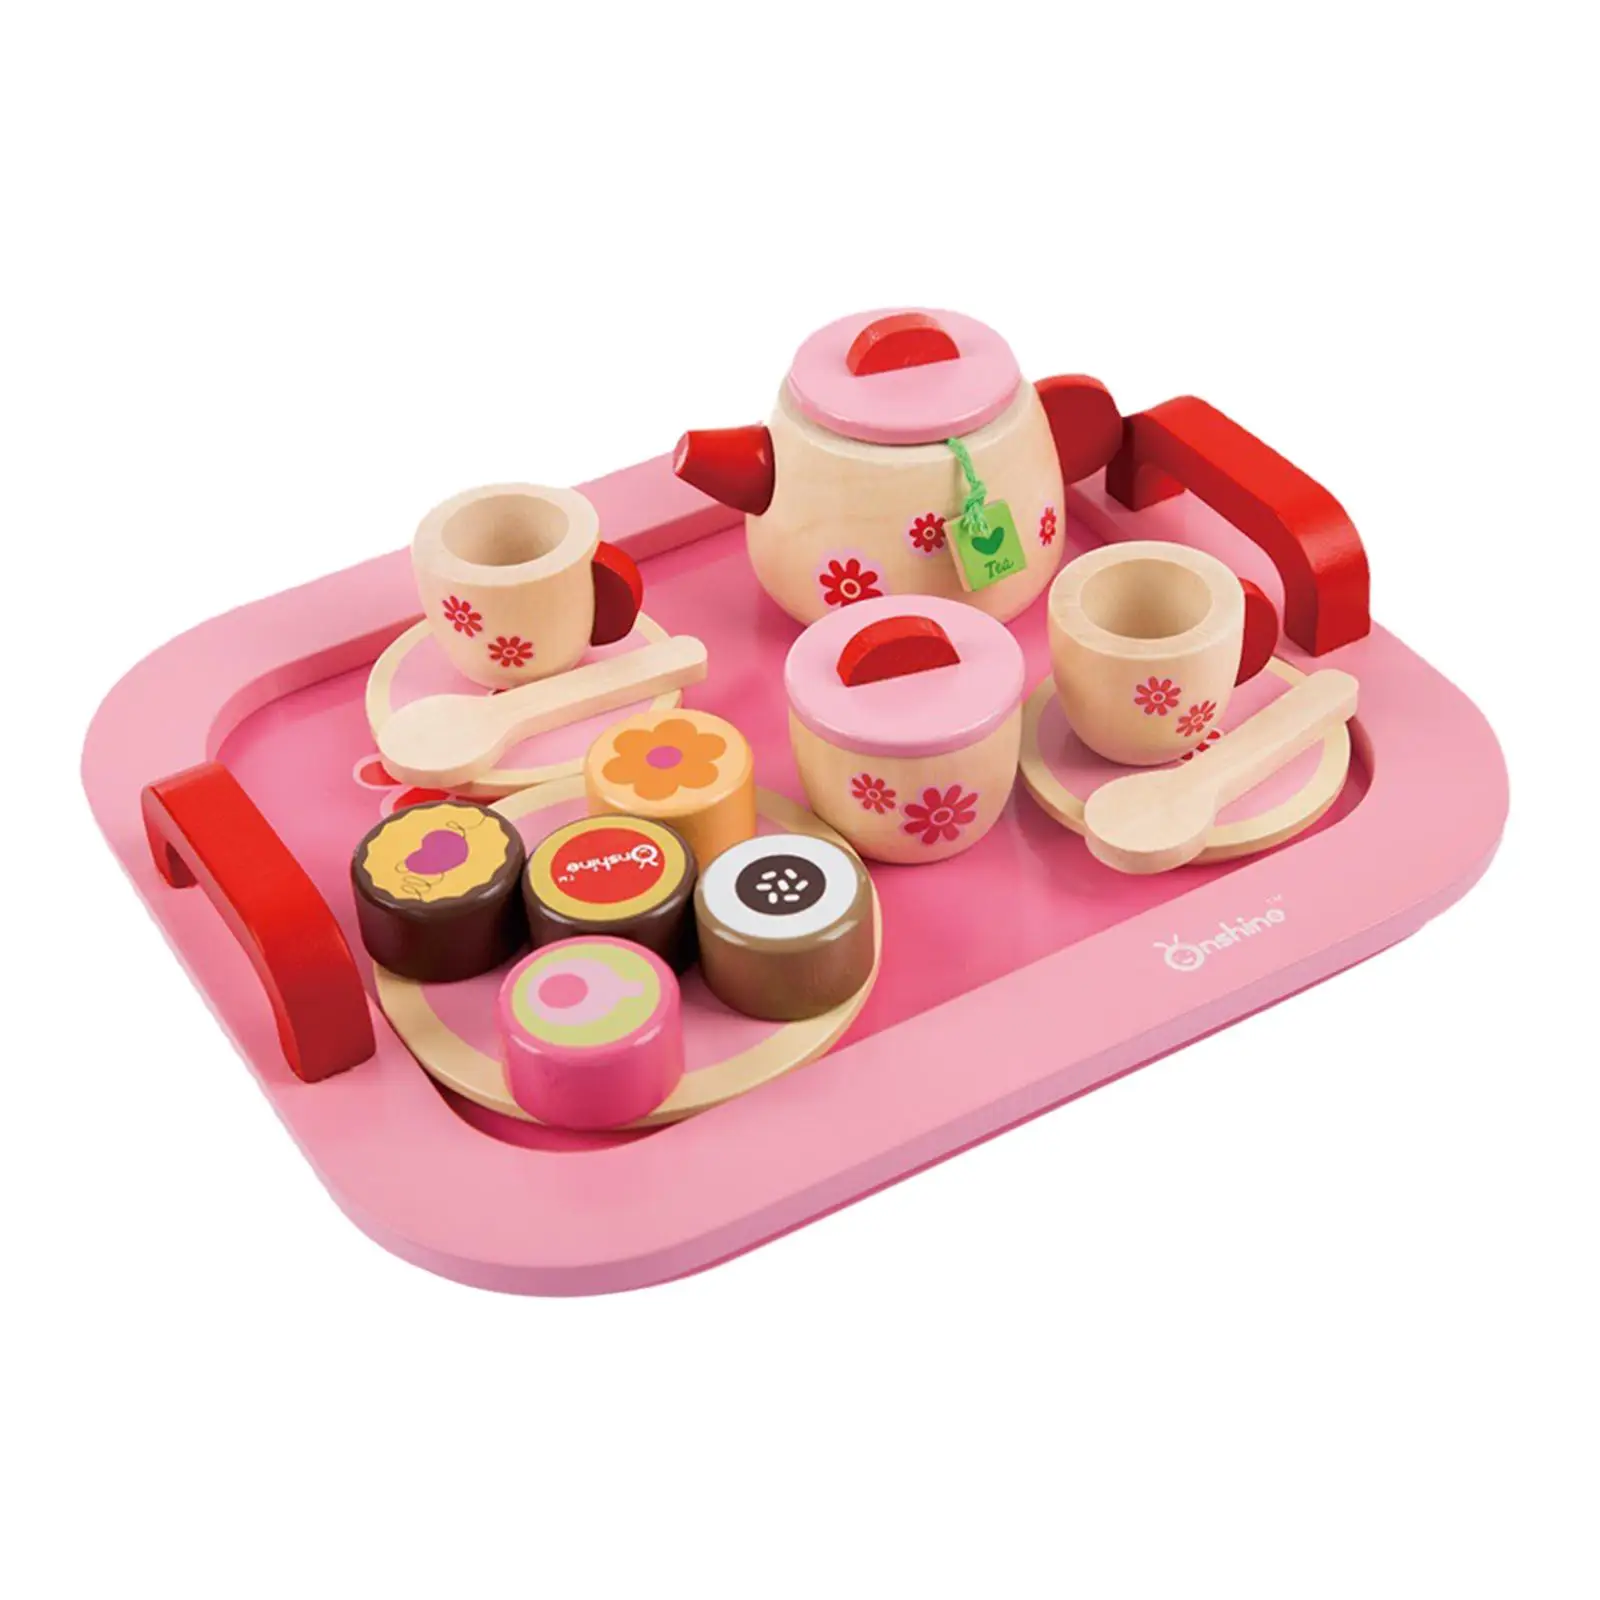 Wooden Pretend Play Tea Party Set Simulation Teacup Toy for Children Toddler